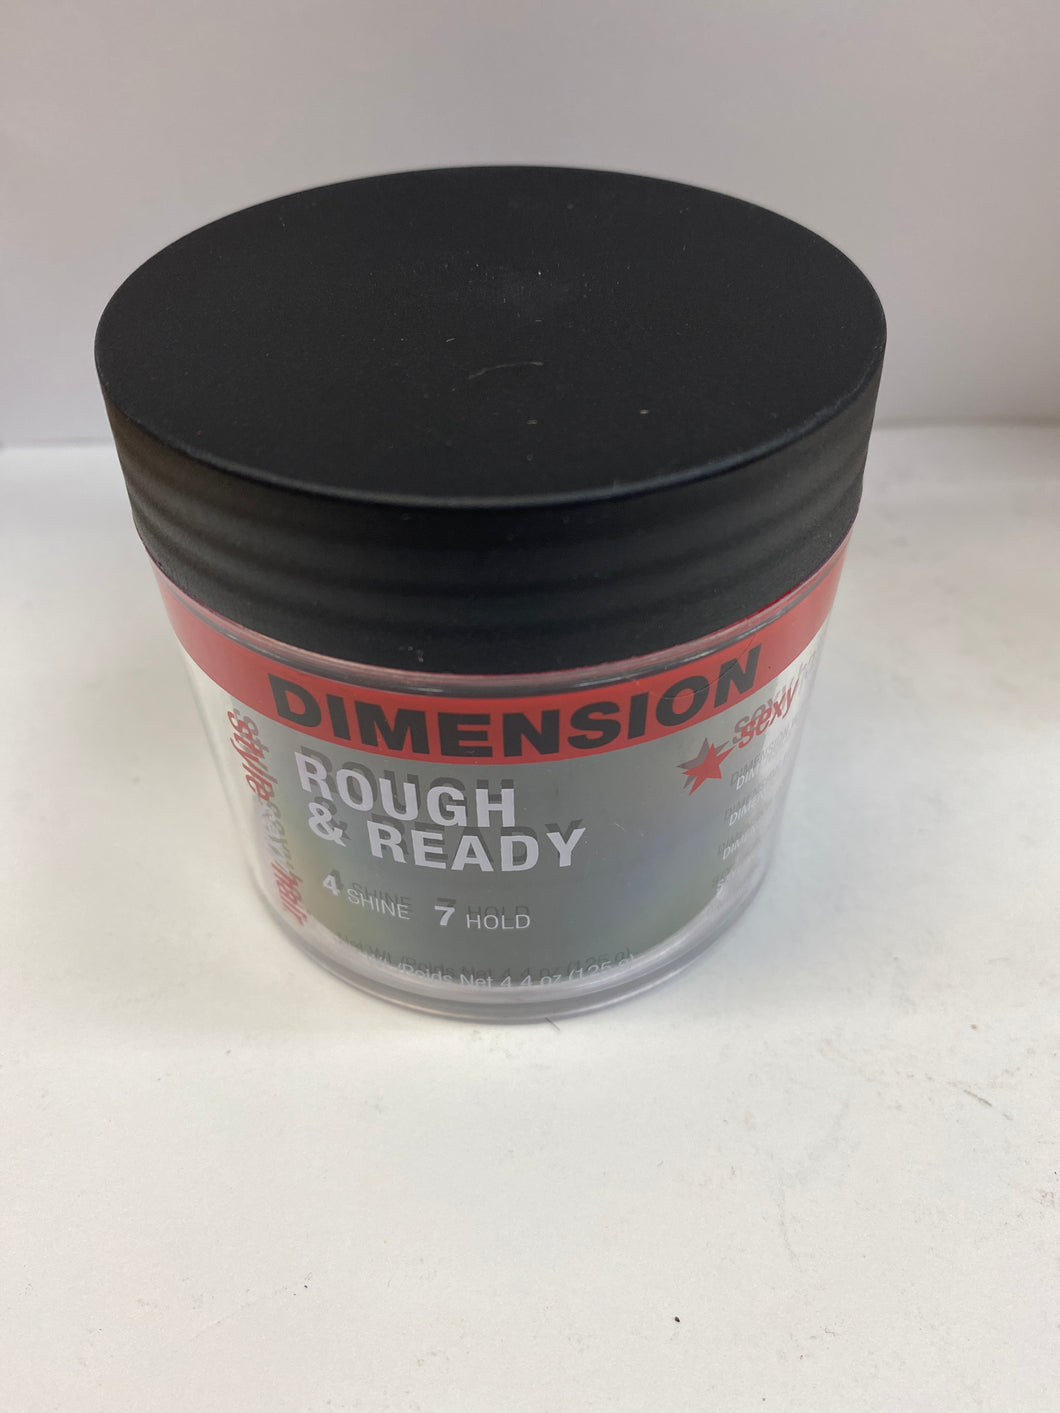 Style Sexy Hair Rough & Ready 4 Shine 7 Hold Dimension With Hold